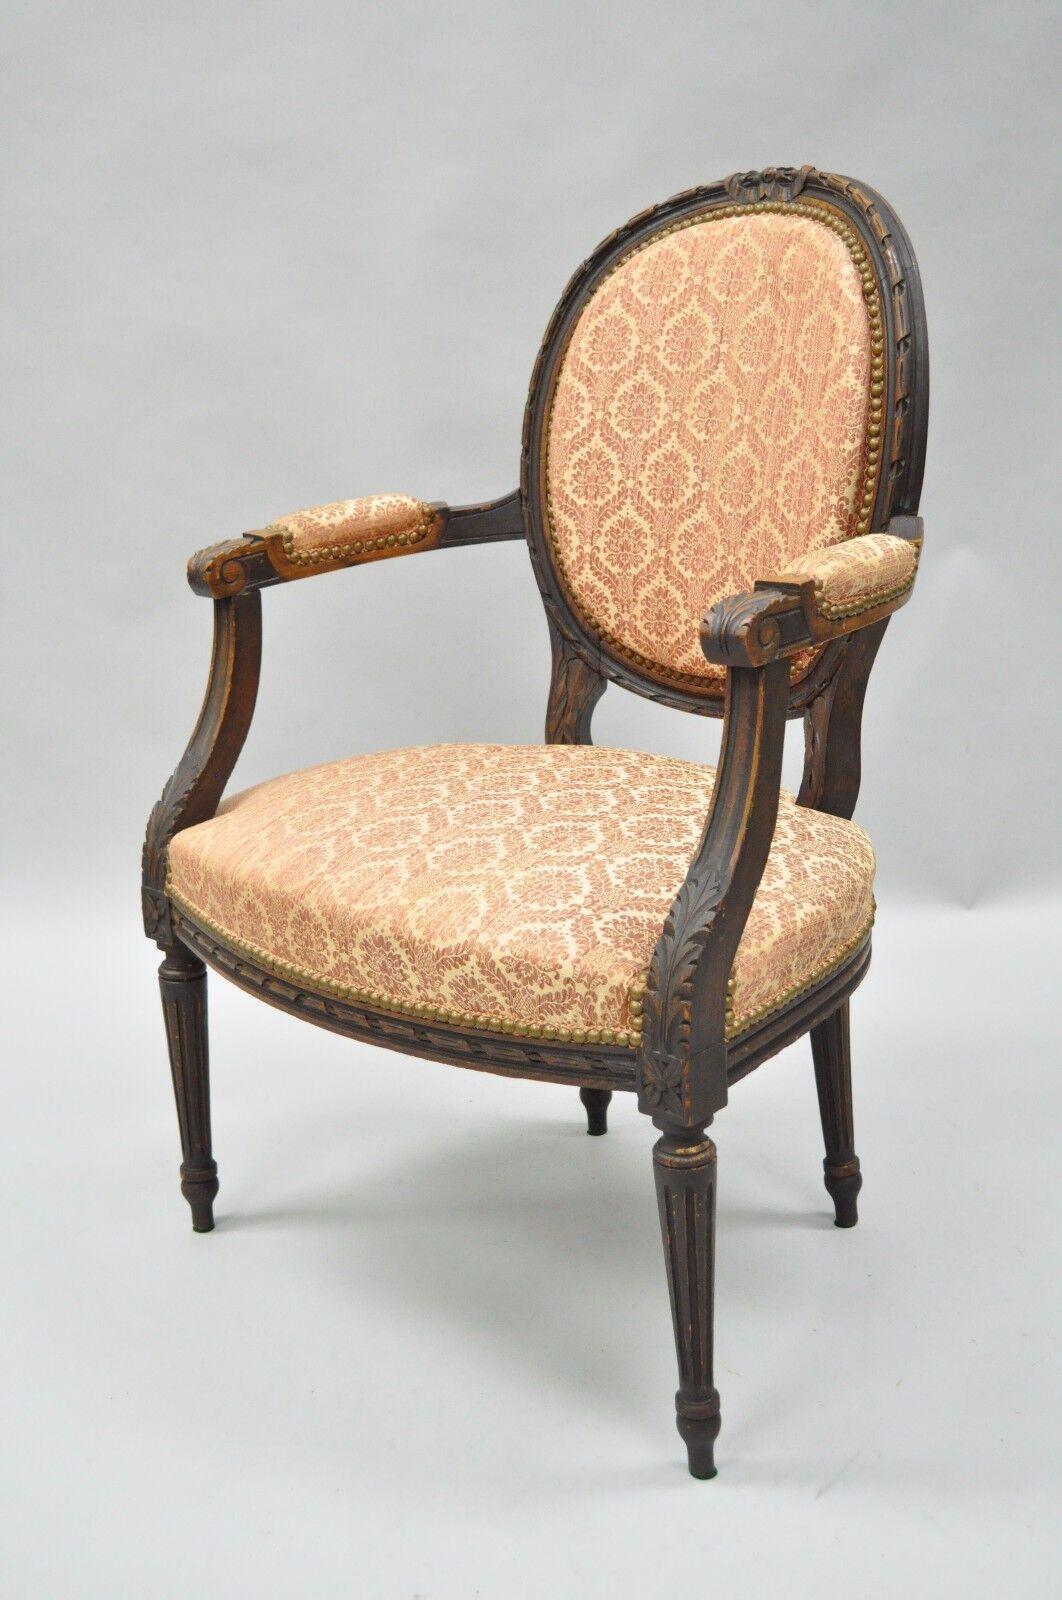 Antique French Louis XVI style bow carved walnut Fauteuil fireside arm chair. Item features a solid carved walnut frame, bow carved crest, reeded and tapered Legs, upholstered armrests, classic Louis XVI Form. Circa Early 1900s, France.